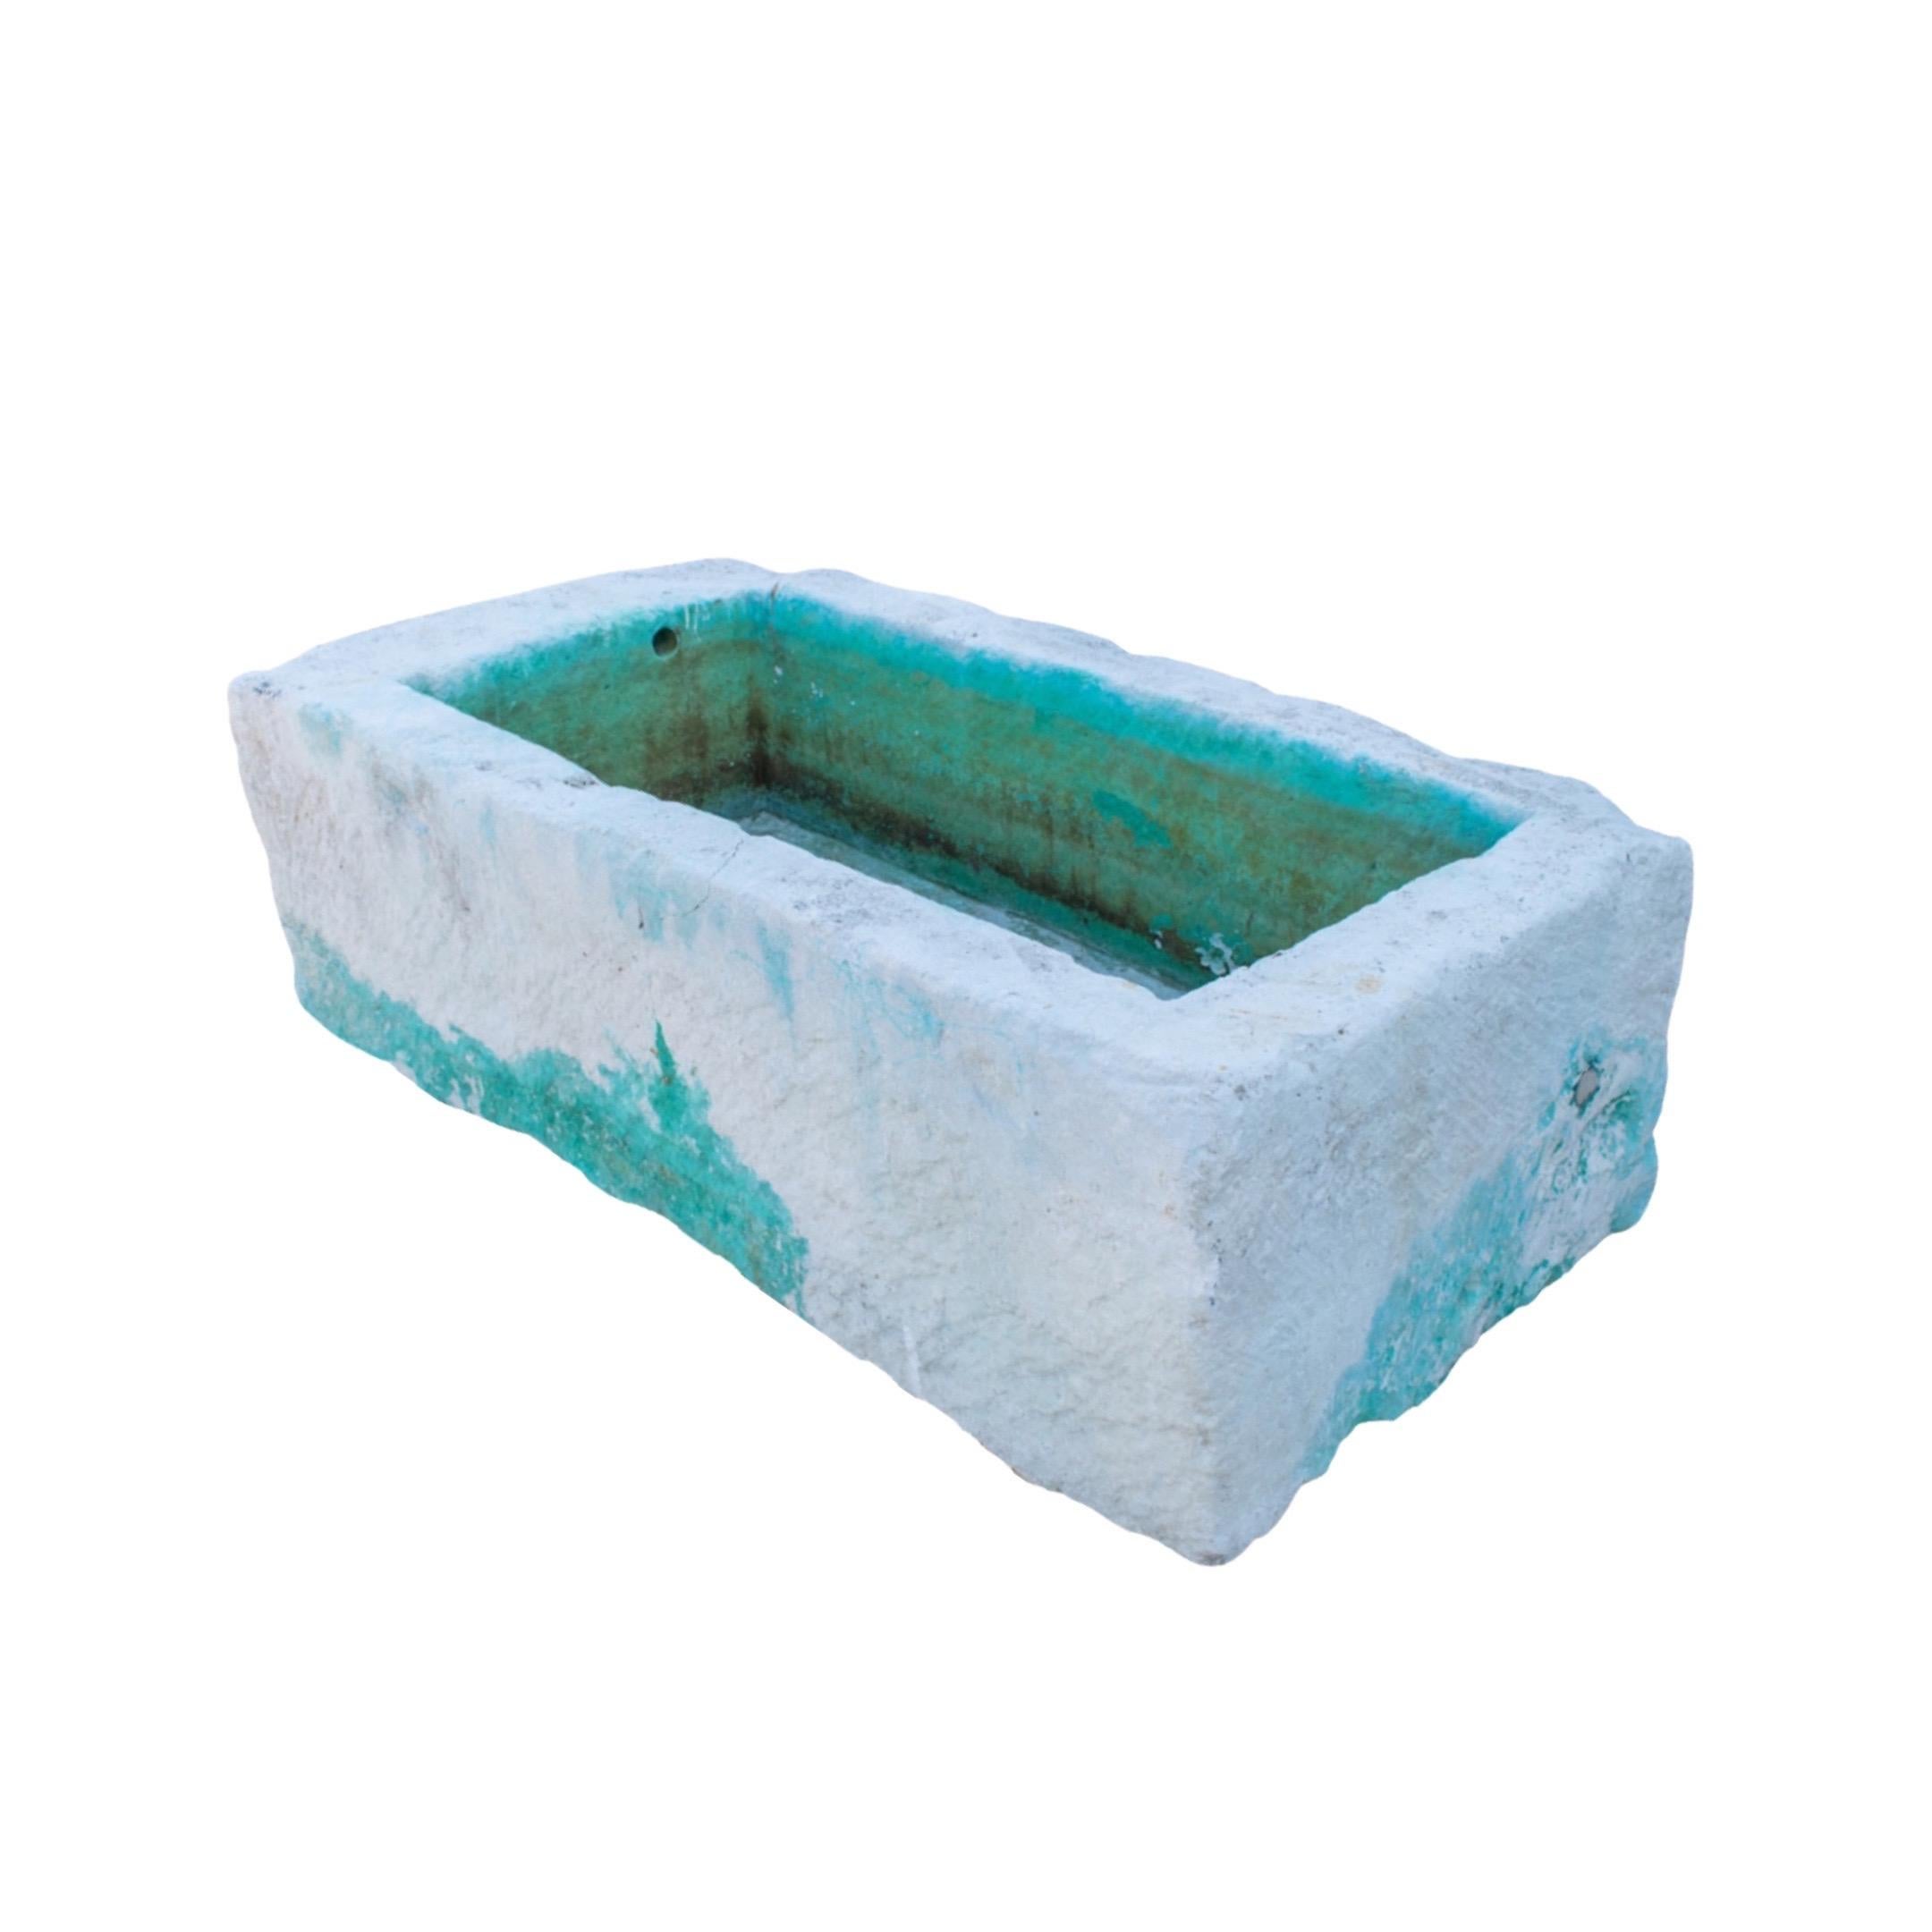 Our French limestone trough is perfect for your garden or patio. Medium size, crafted from robust limestone, it brings beauty and durability to your outdoor space. It is a great choice for storing water, flowers, and other plants. With its timeless